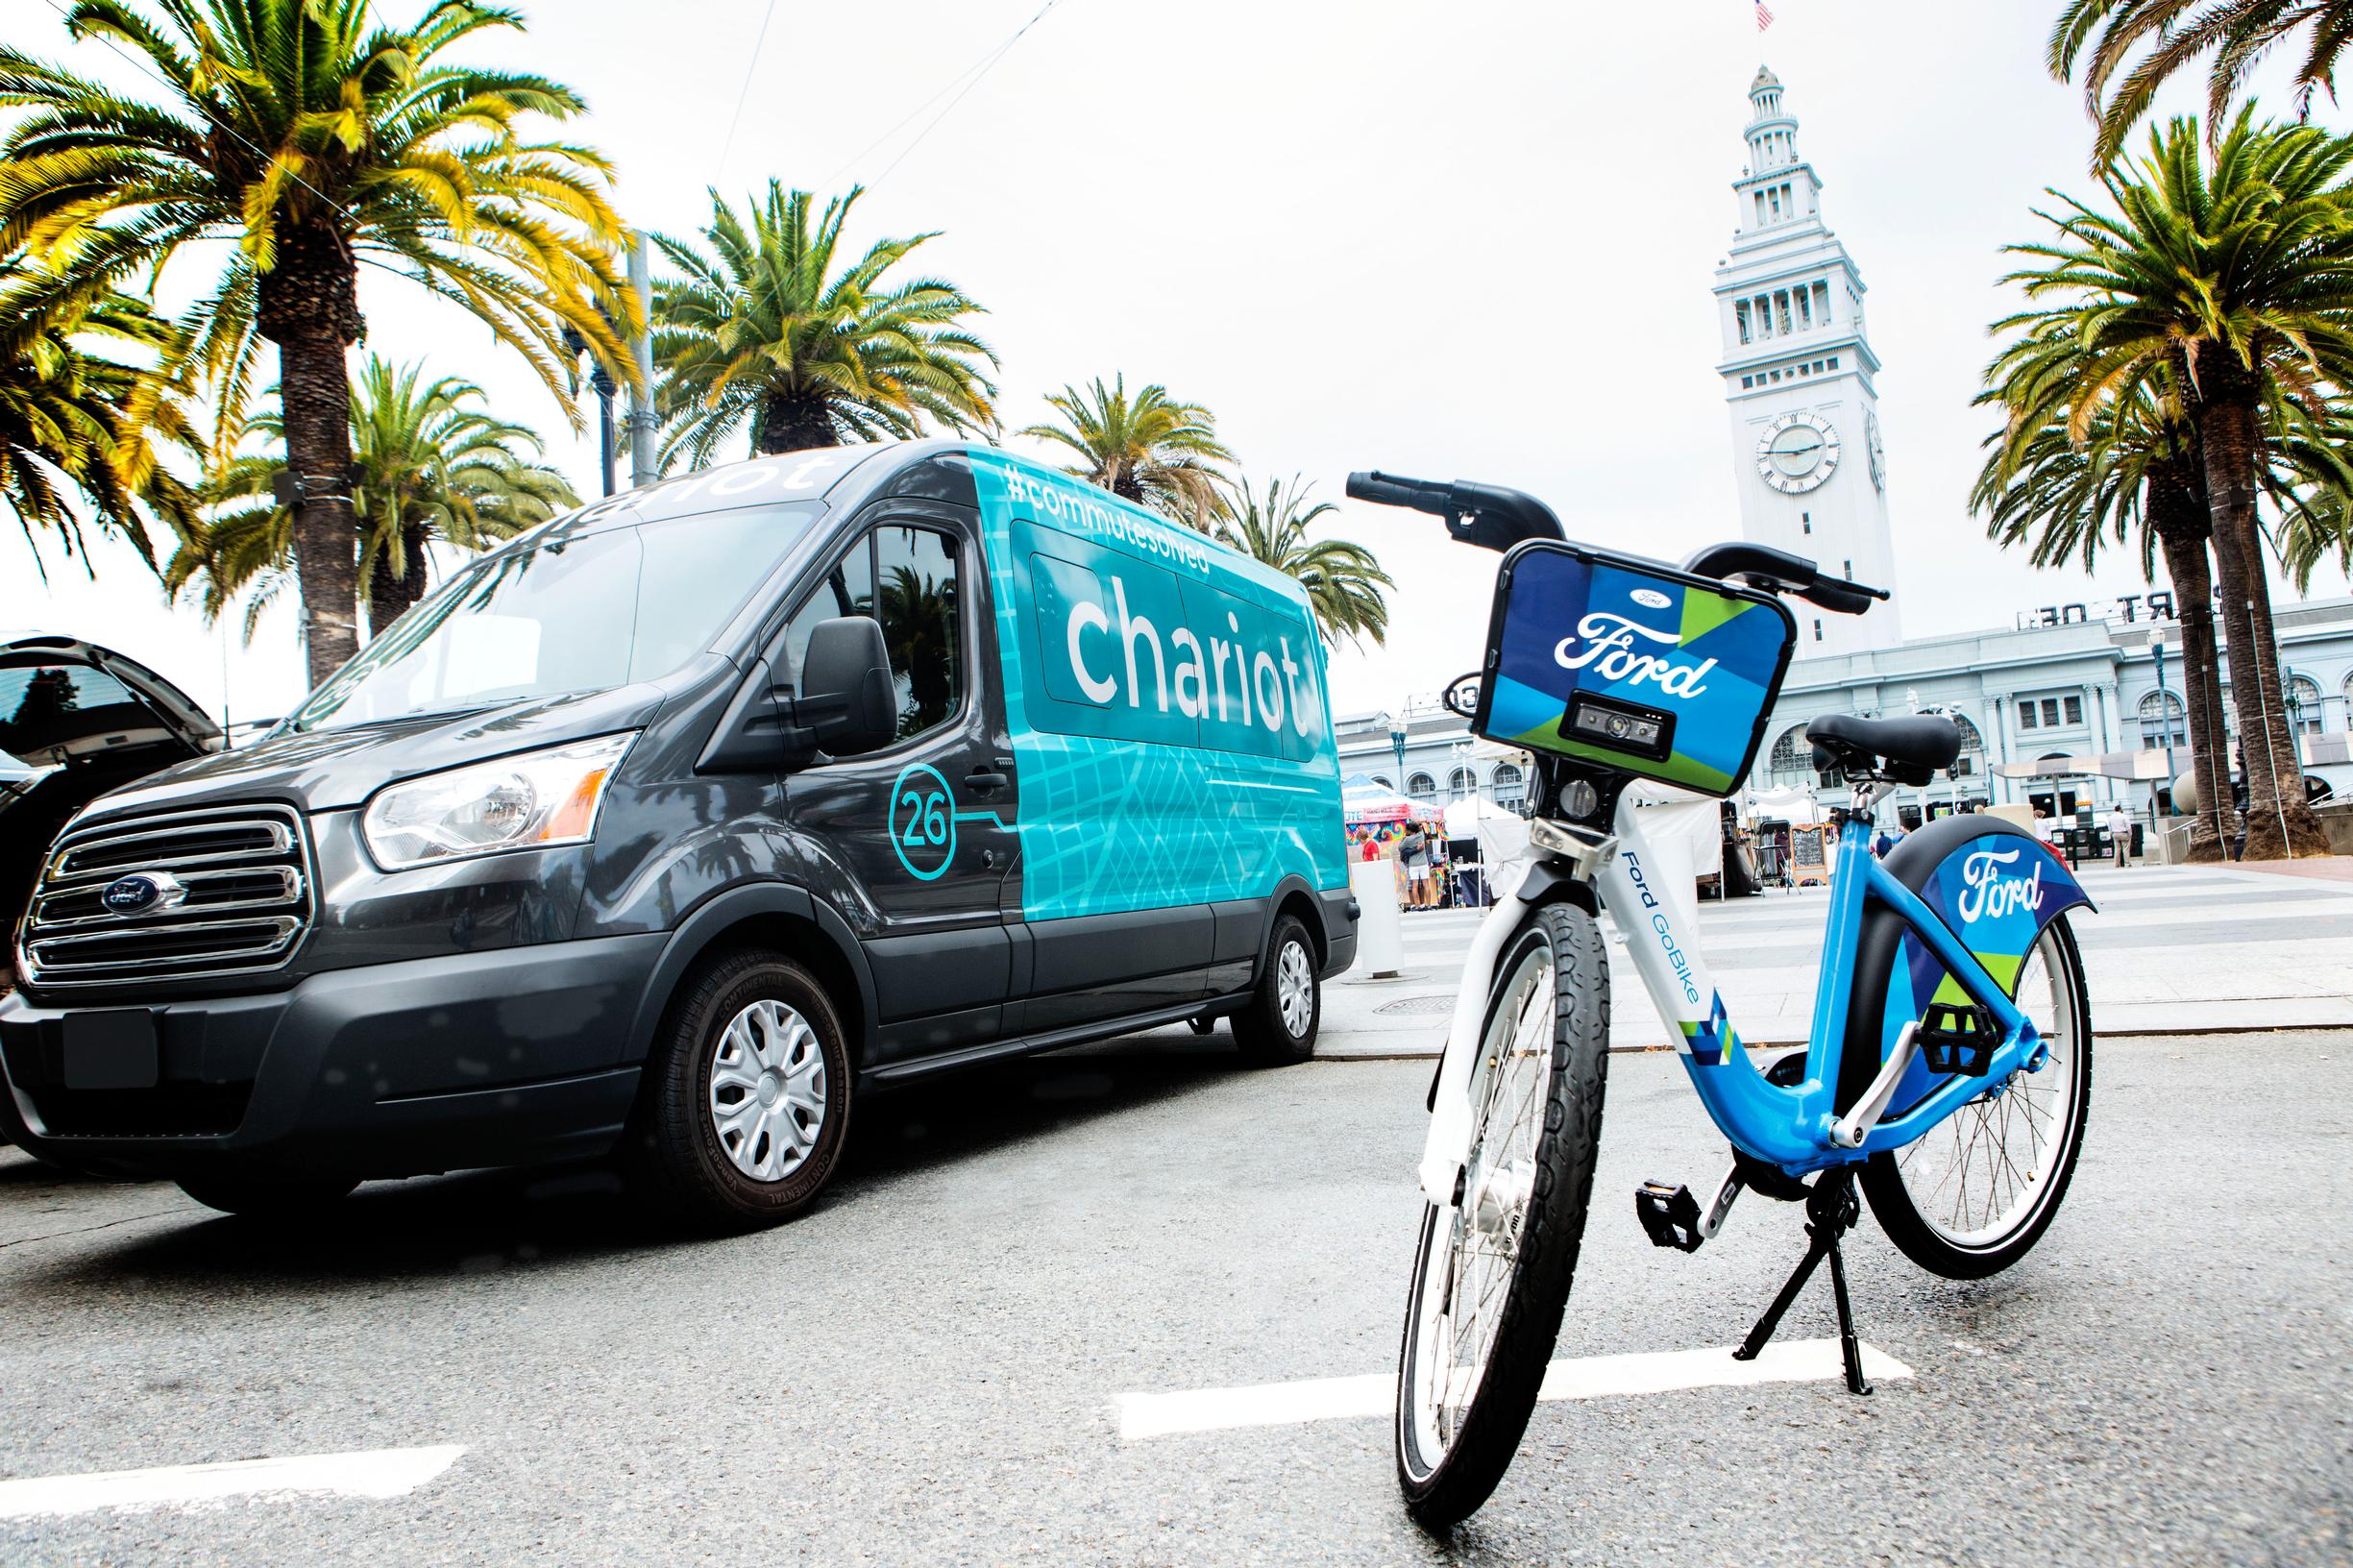 Ford has bough the San Francisco-based Chariot ride-sharing service and is preparing to launch the GoBike cycle hire service in the Californian city